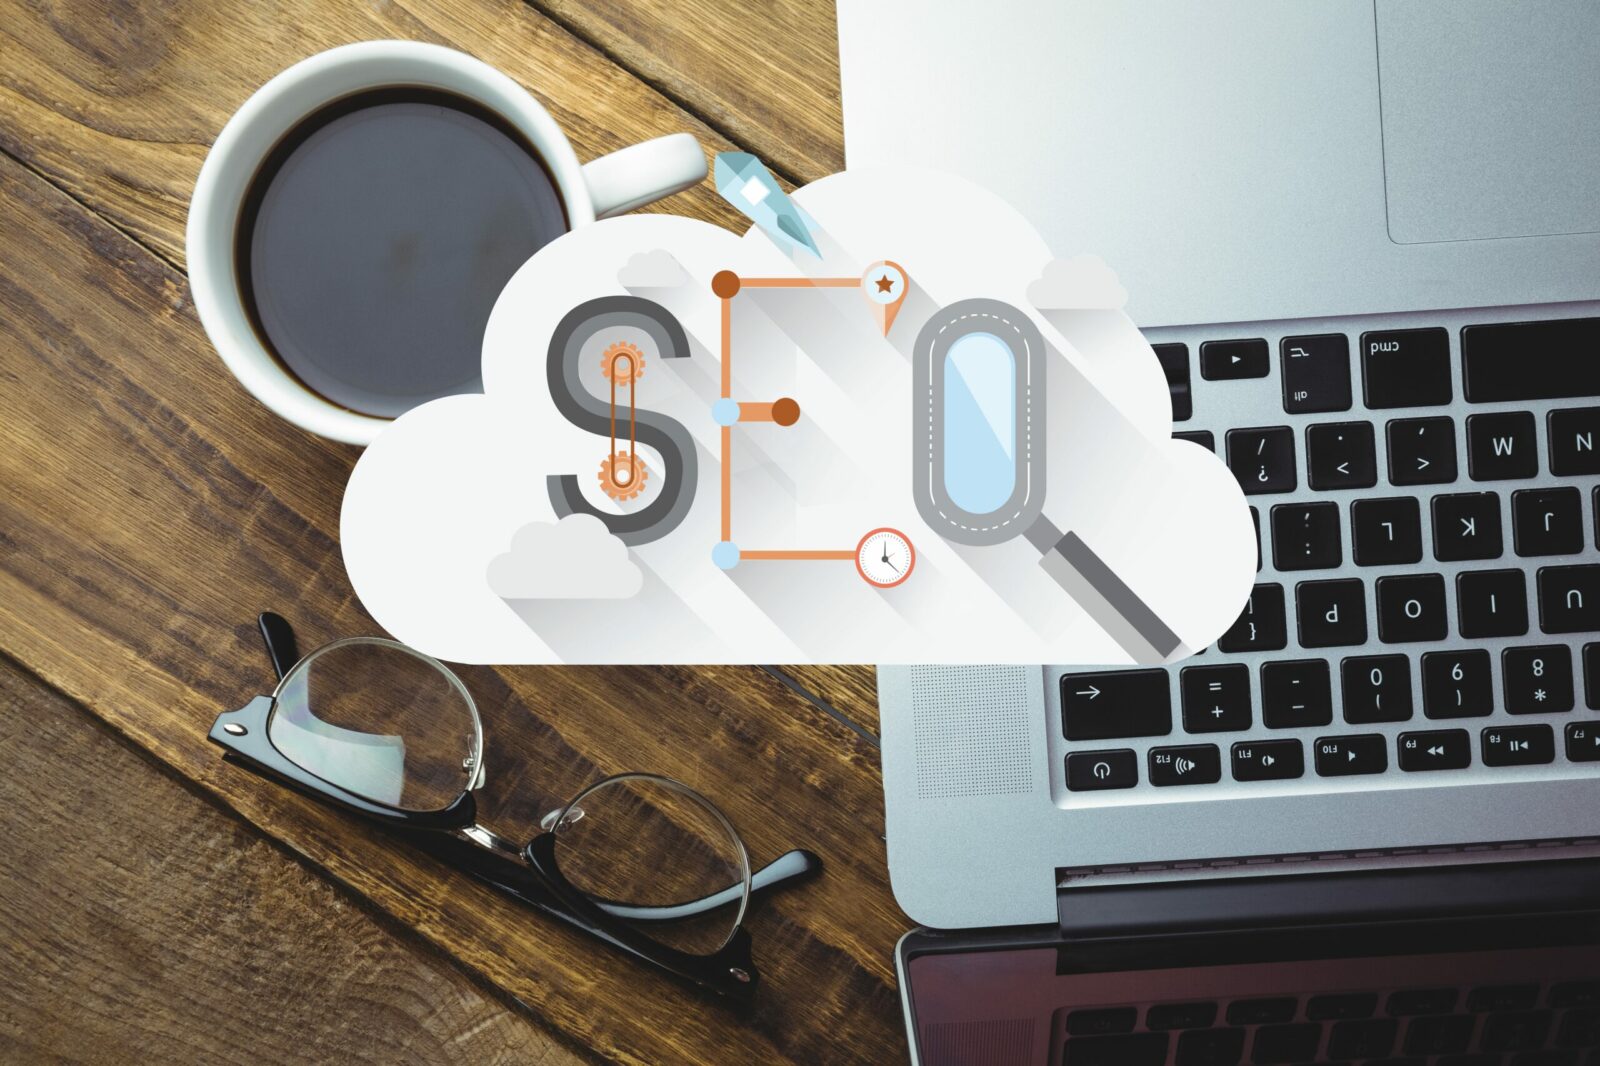 Article Réferencement web SEO